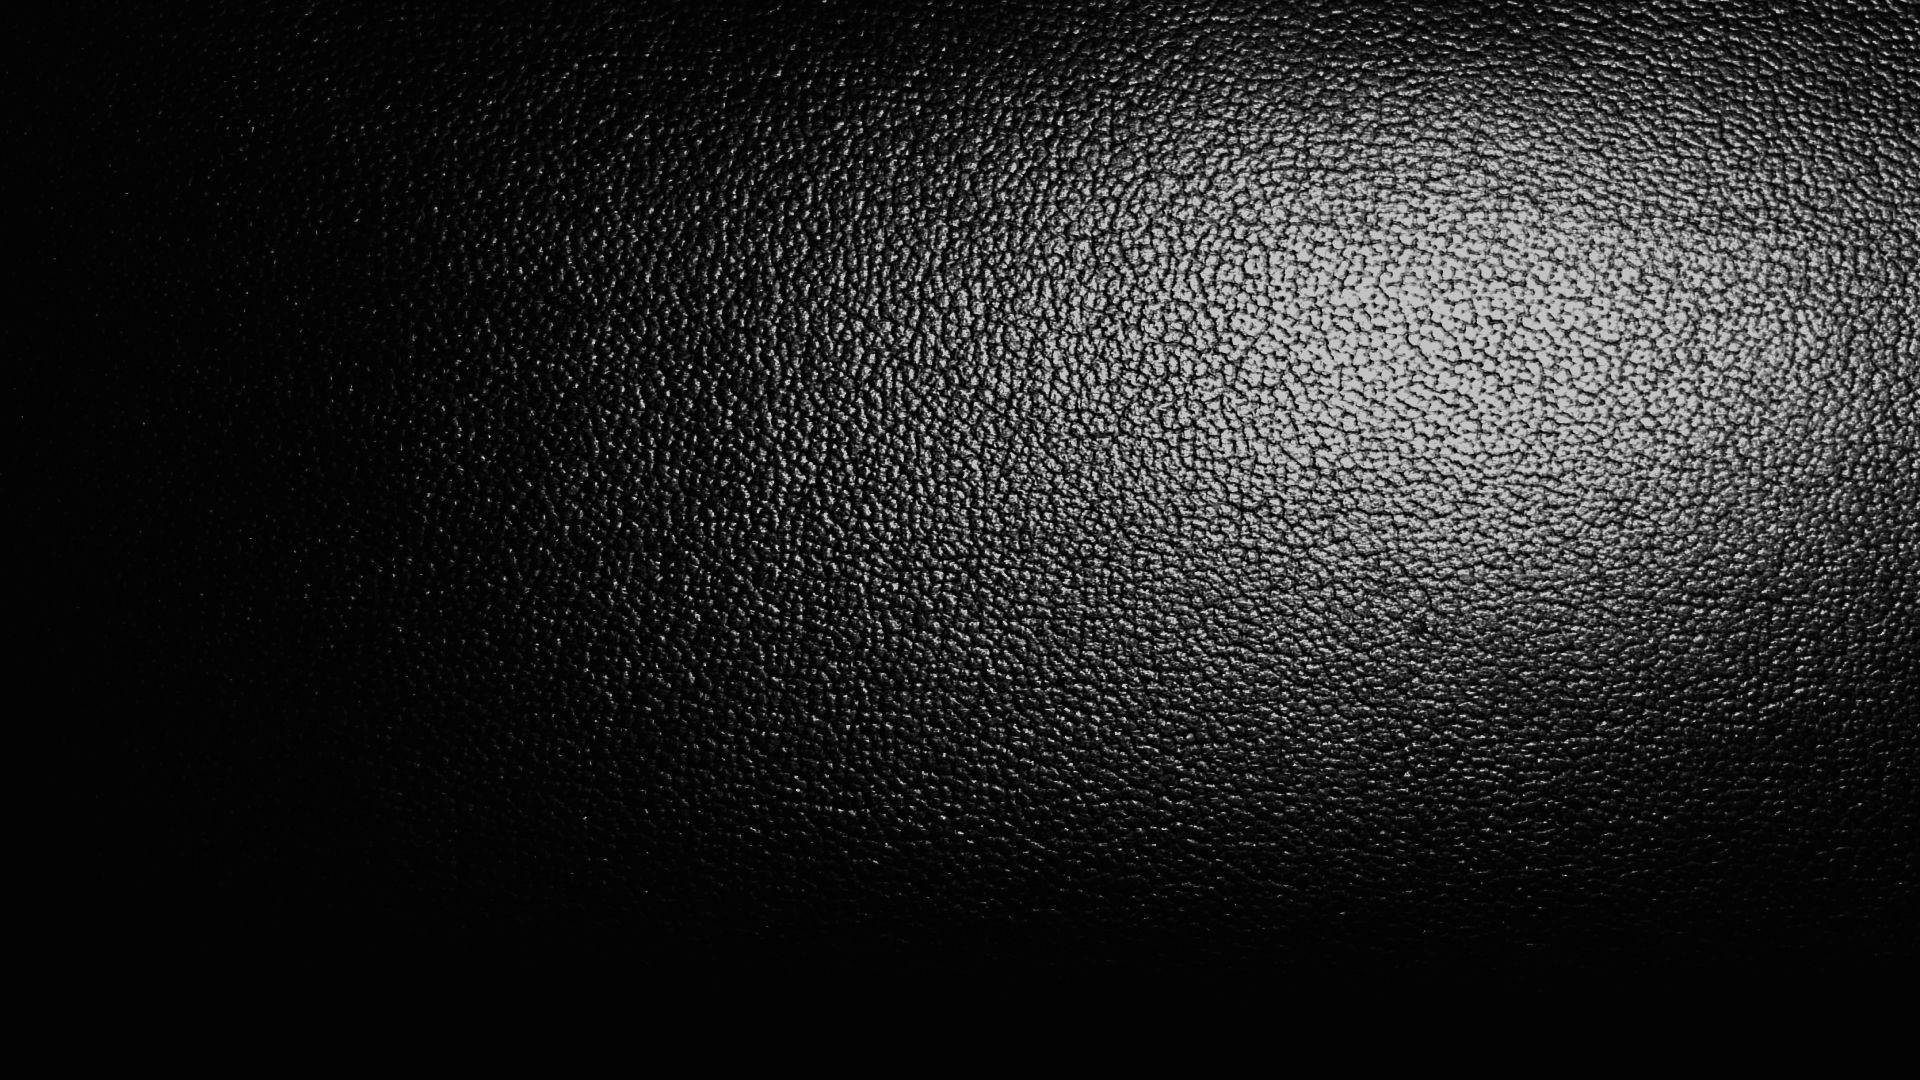 1920x1080 Download Leather Textures Wallpaper  | Full HD Wallpapers Red  Texture Background, Wallpaper Images Hd